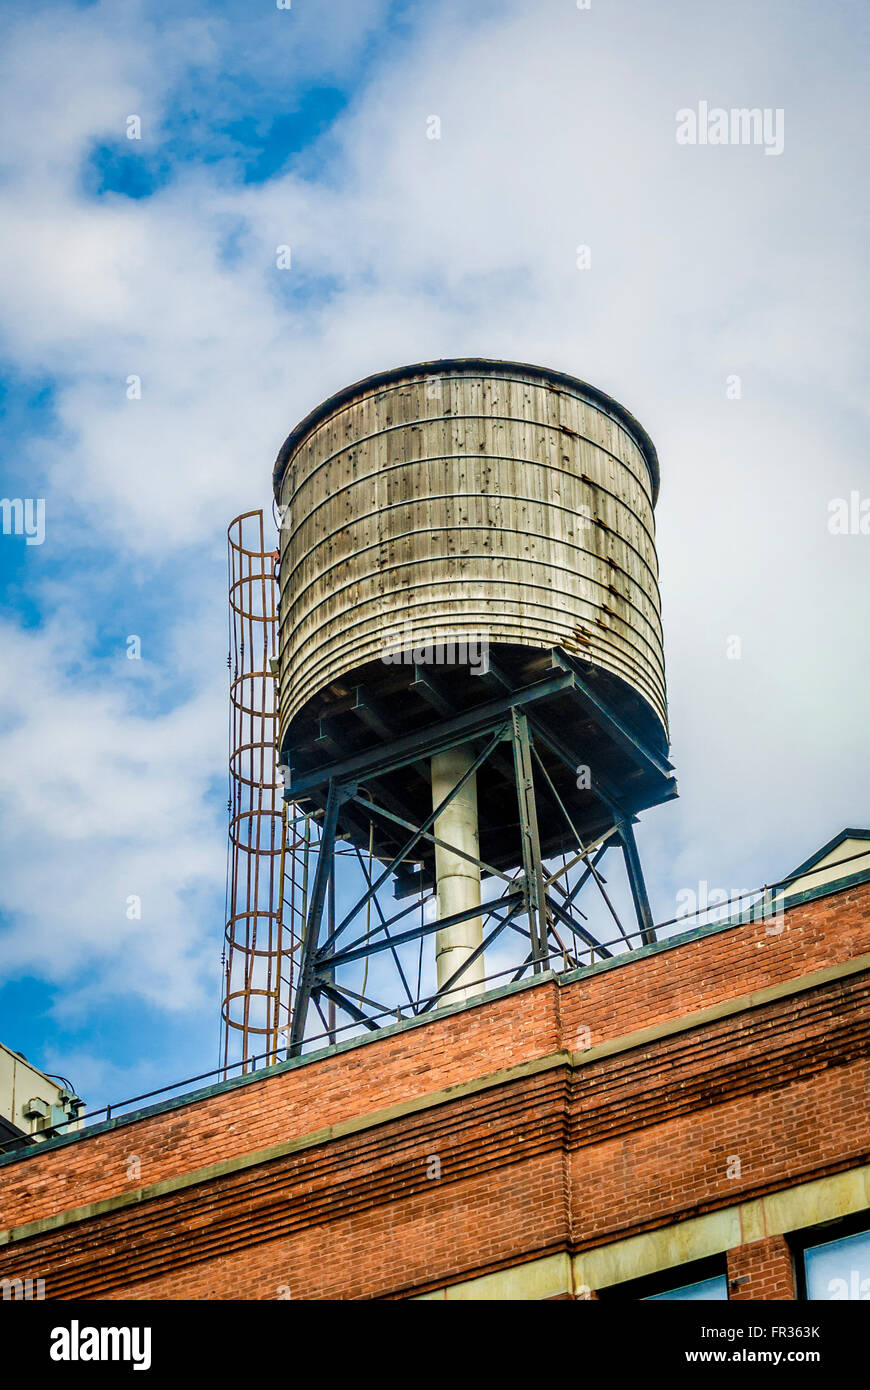 Traditional wooden Water Tower on roof of building, New York City, USA. Stock Photo